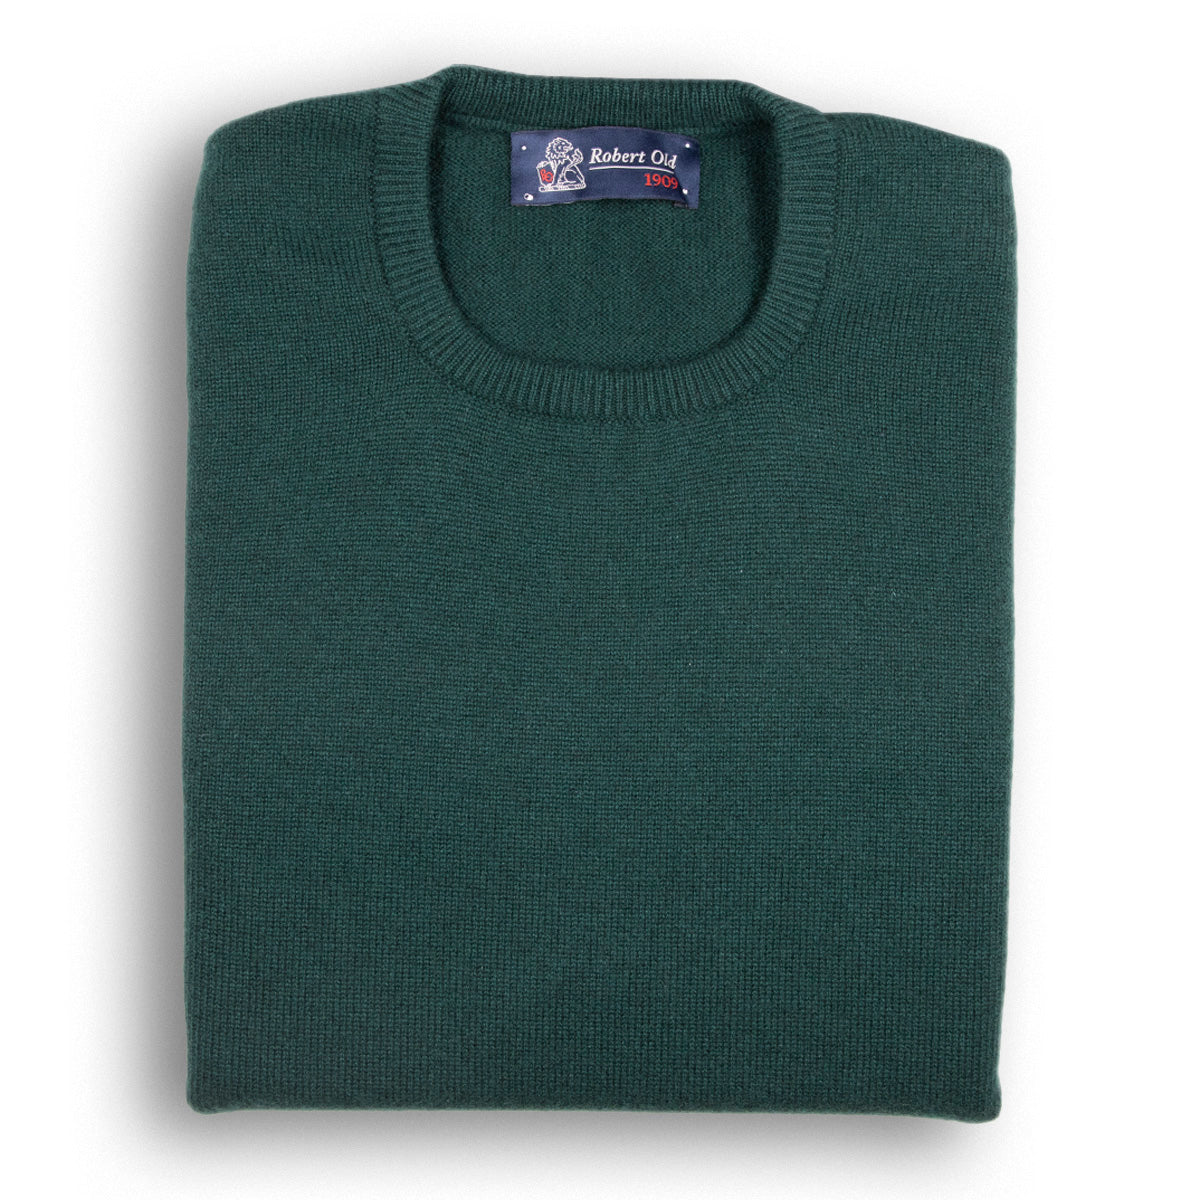 Holly Green Tiree 4ply Crew Neck Cashmere Sweater  Robert Old UK 36"  